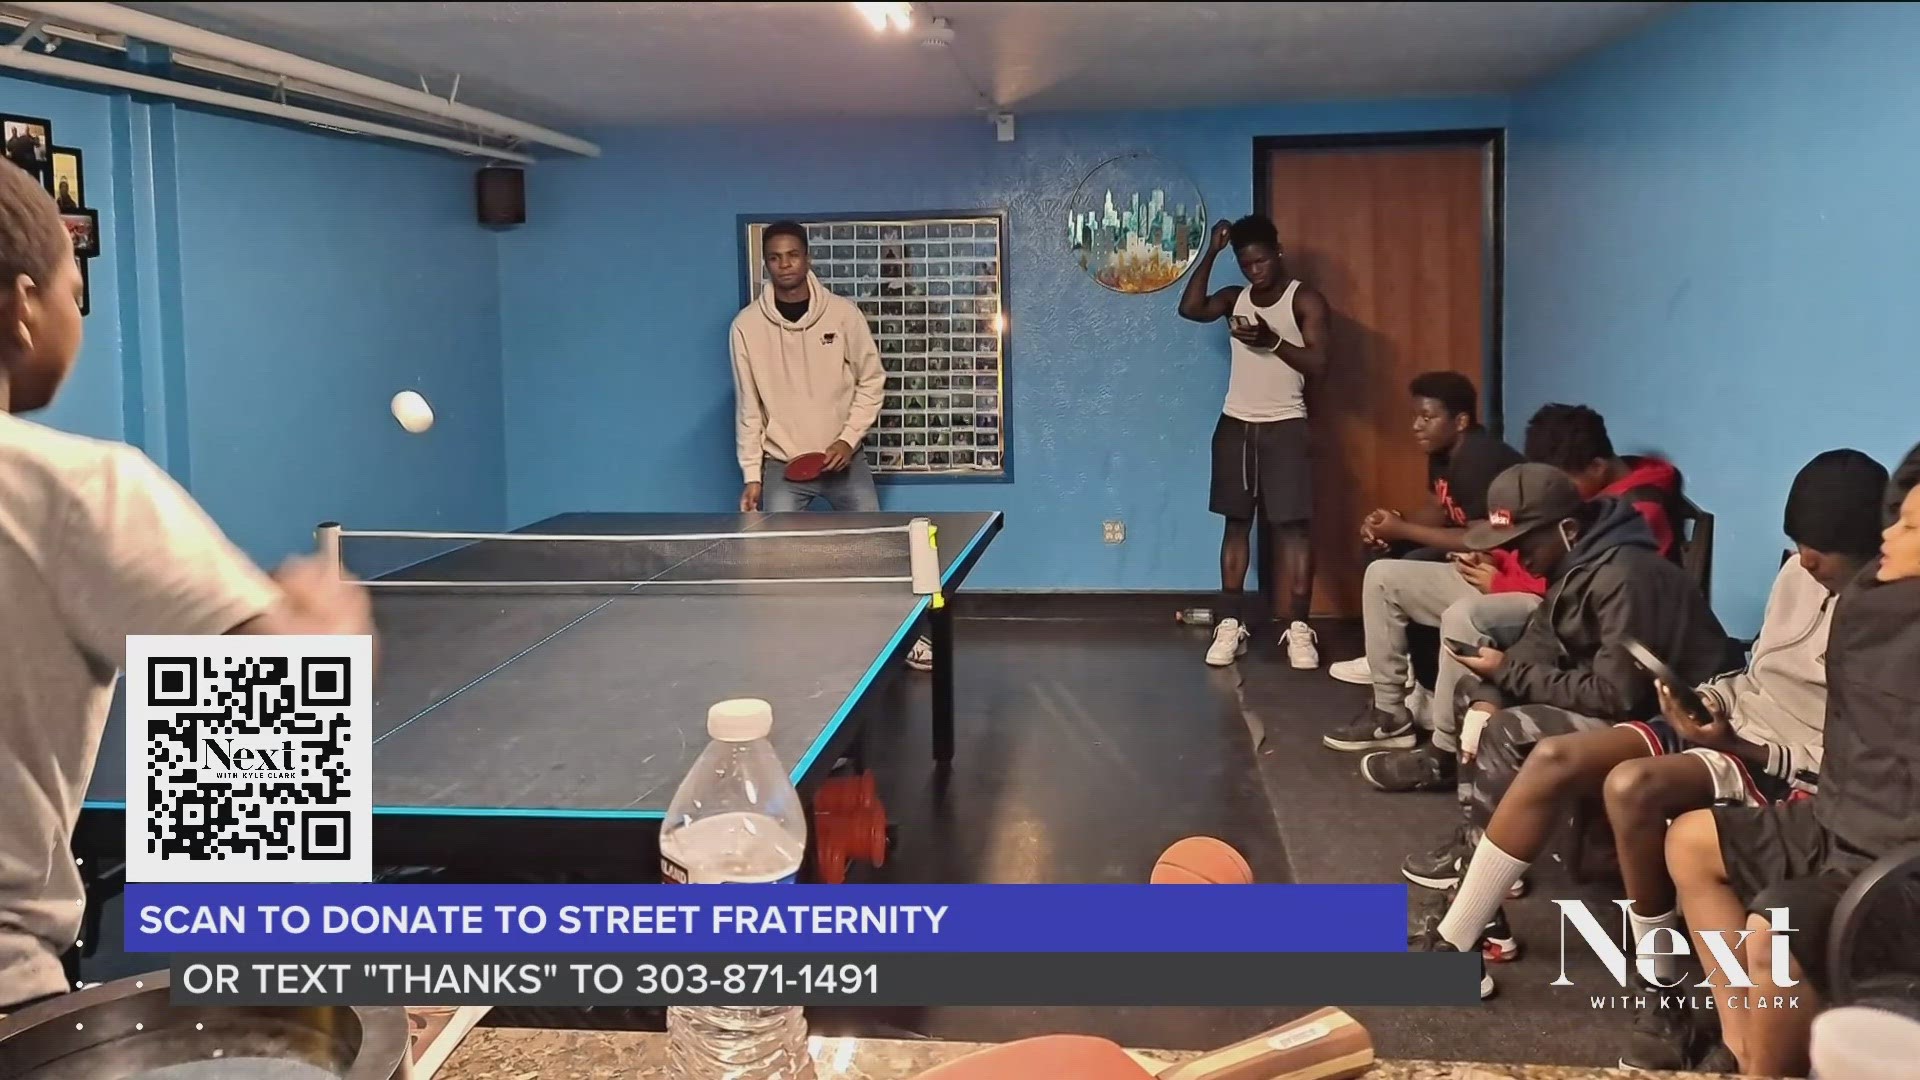 Two weeks ago, we told you about the nonprofit Street Fraternity, which intervenes in the lives of young men along the East Colfax corridor before violence does.